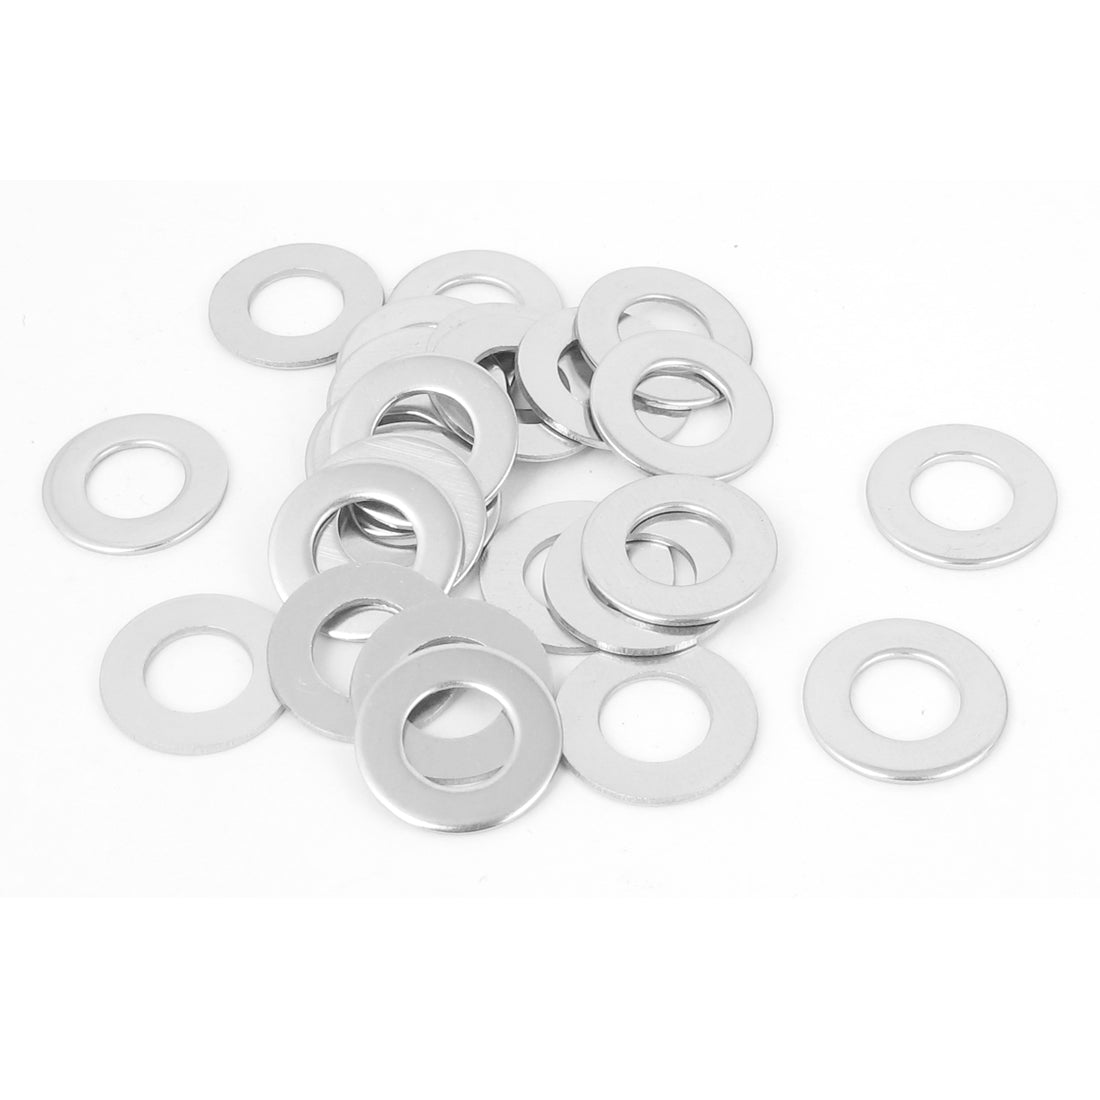 uxcell Uxcell 25pcs M8 x 16mm x 1mm Stainless Steel Flat Washer Plain Spacer Gasket Silver Tone